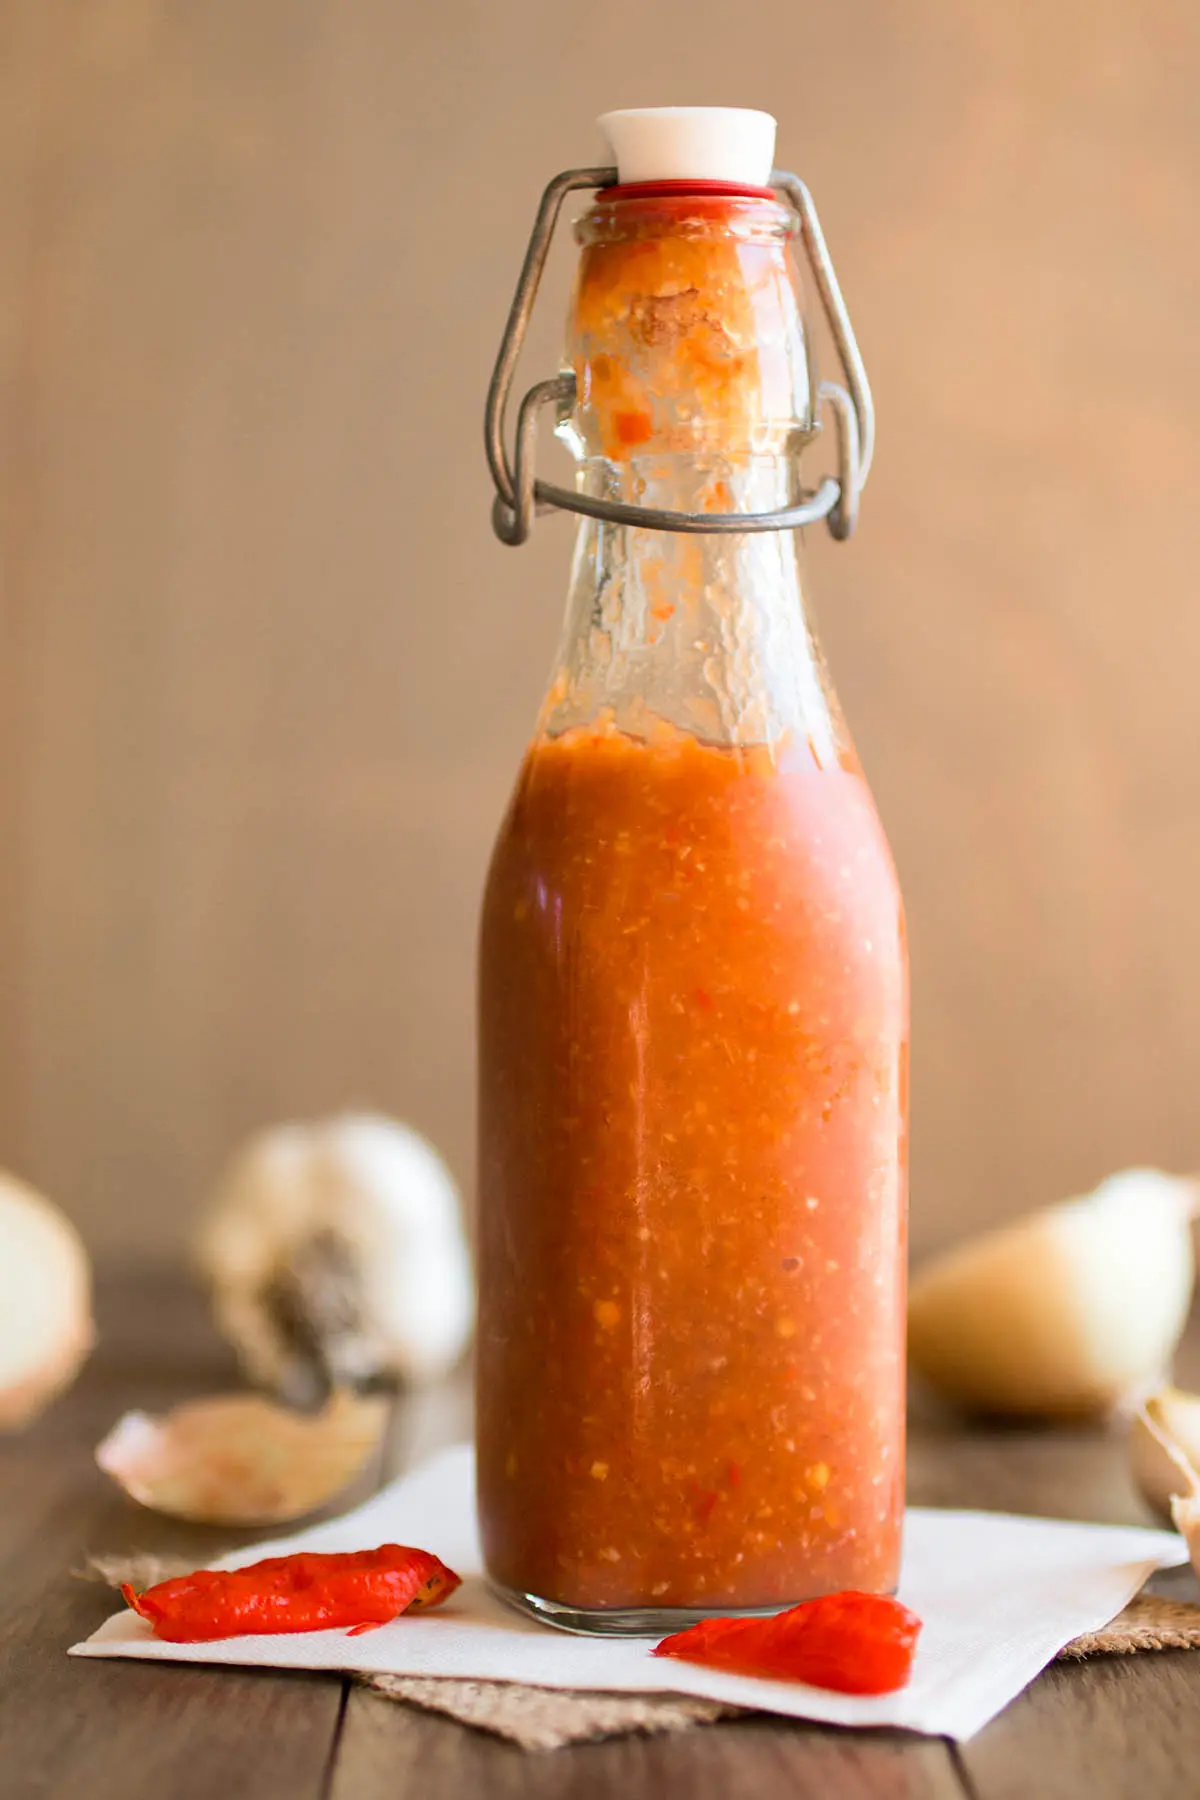 smoked ghost pepper hot sauce recipe - What is Ghost Pepper Sauce made of